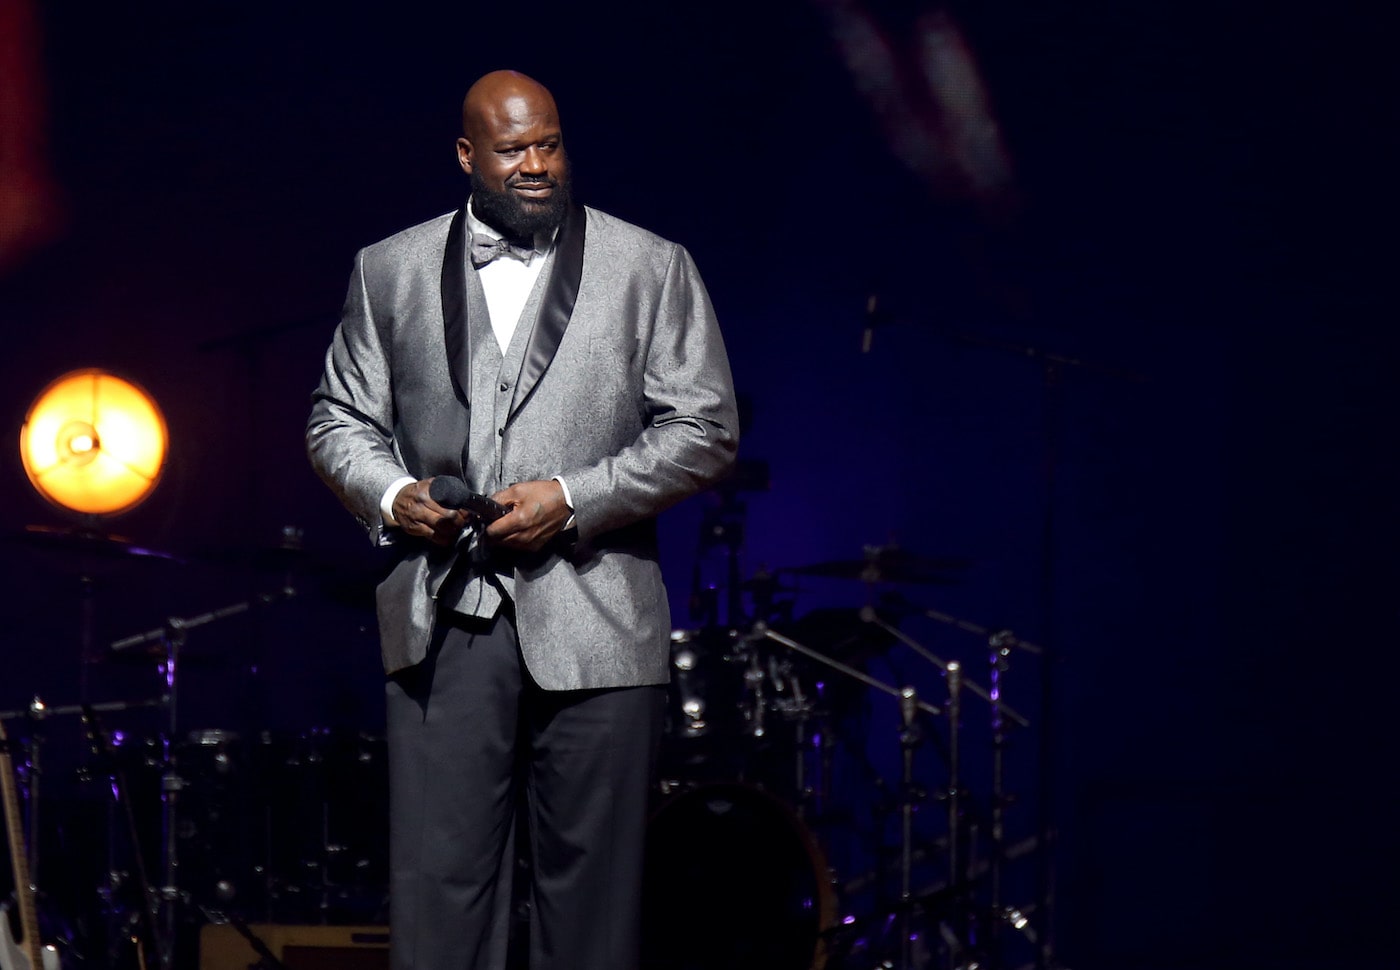 Shaquille O'Neal stands on stage in a tuxedo